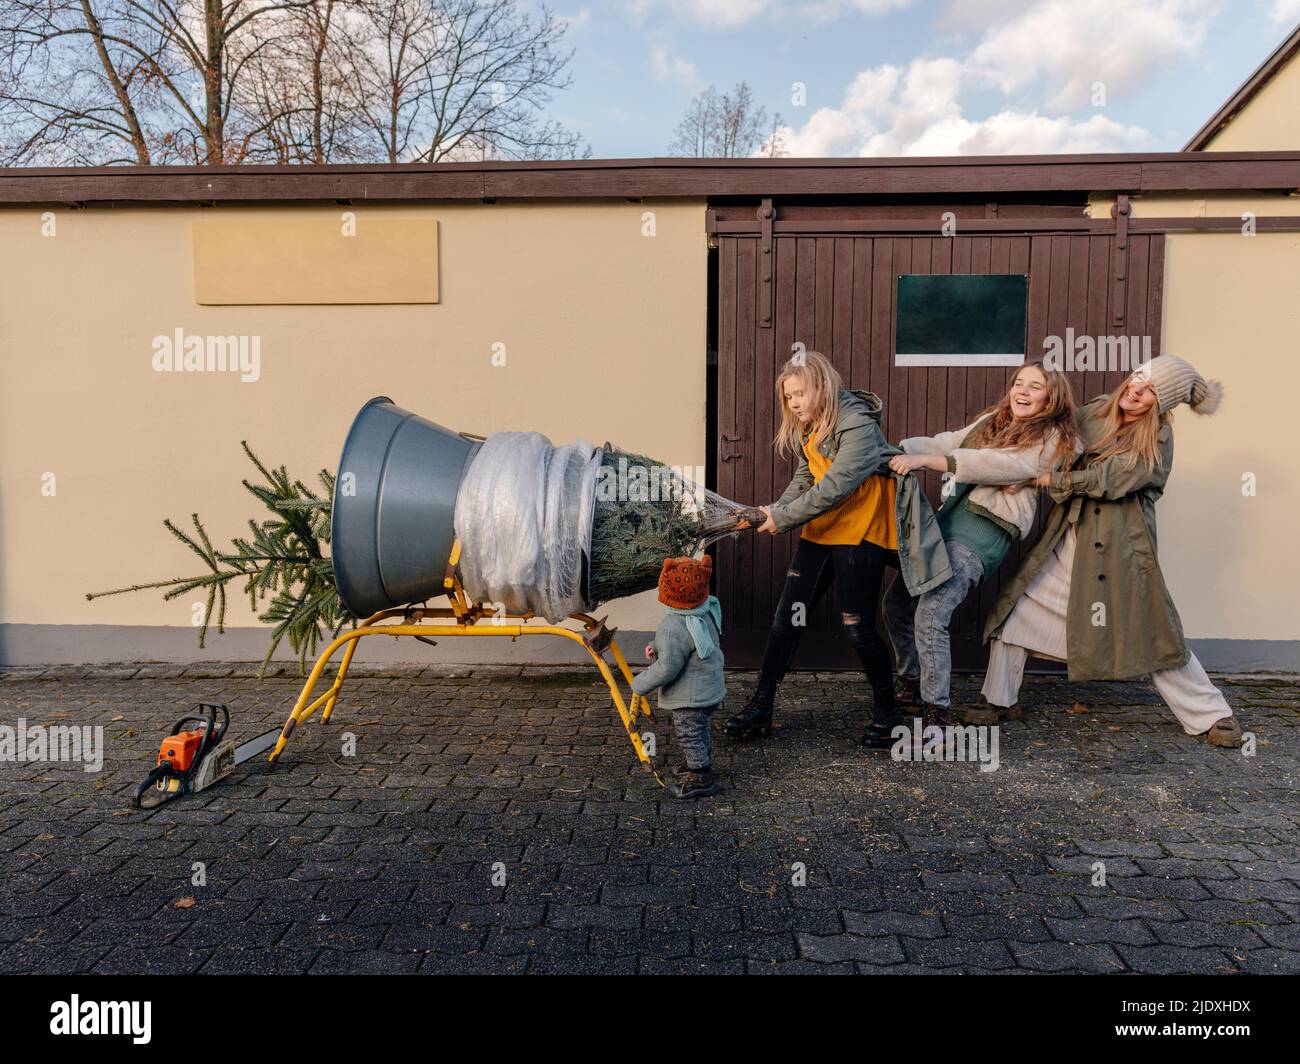 Family pulling Christmas tree in front of wall Stock Photo